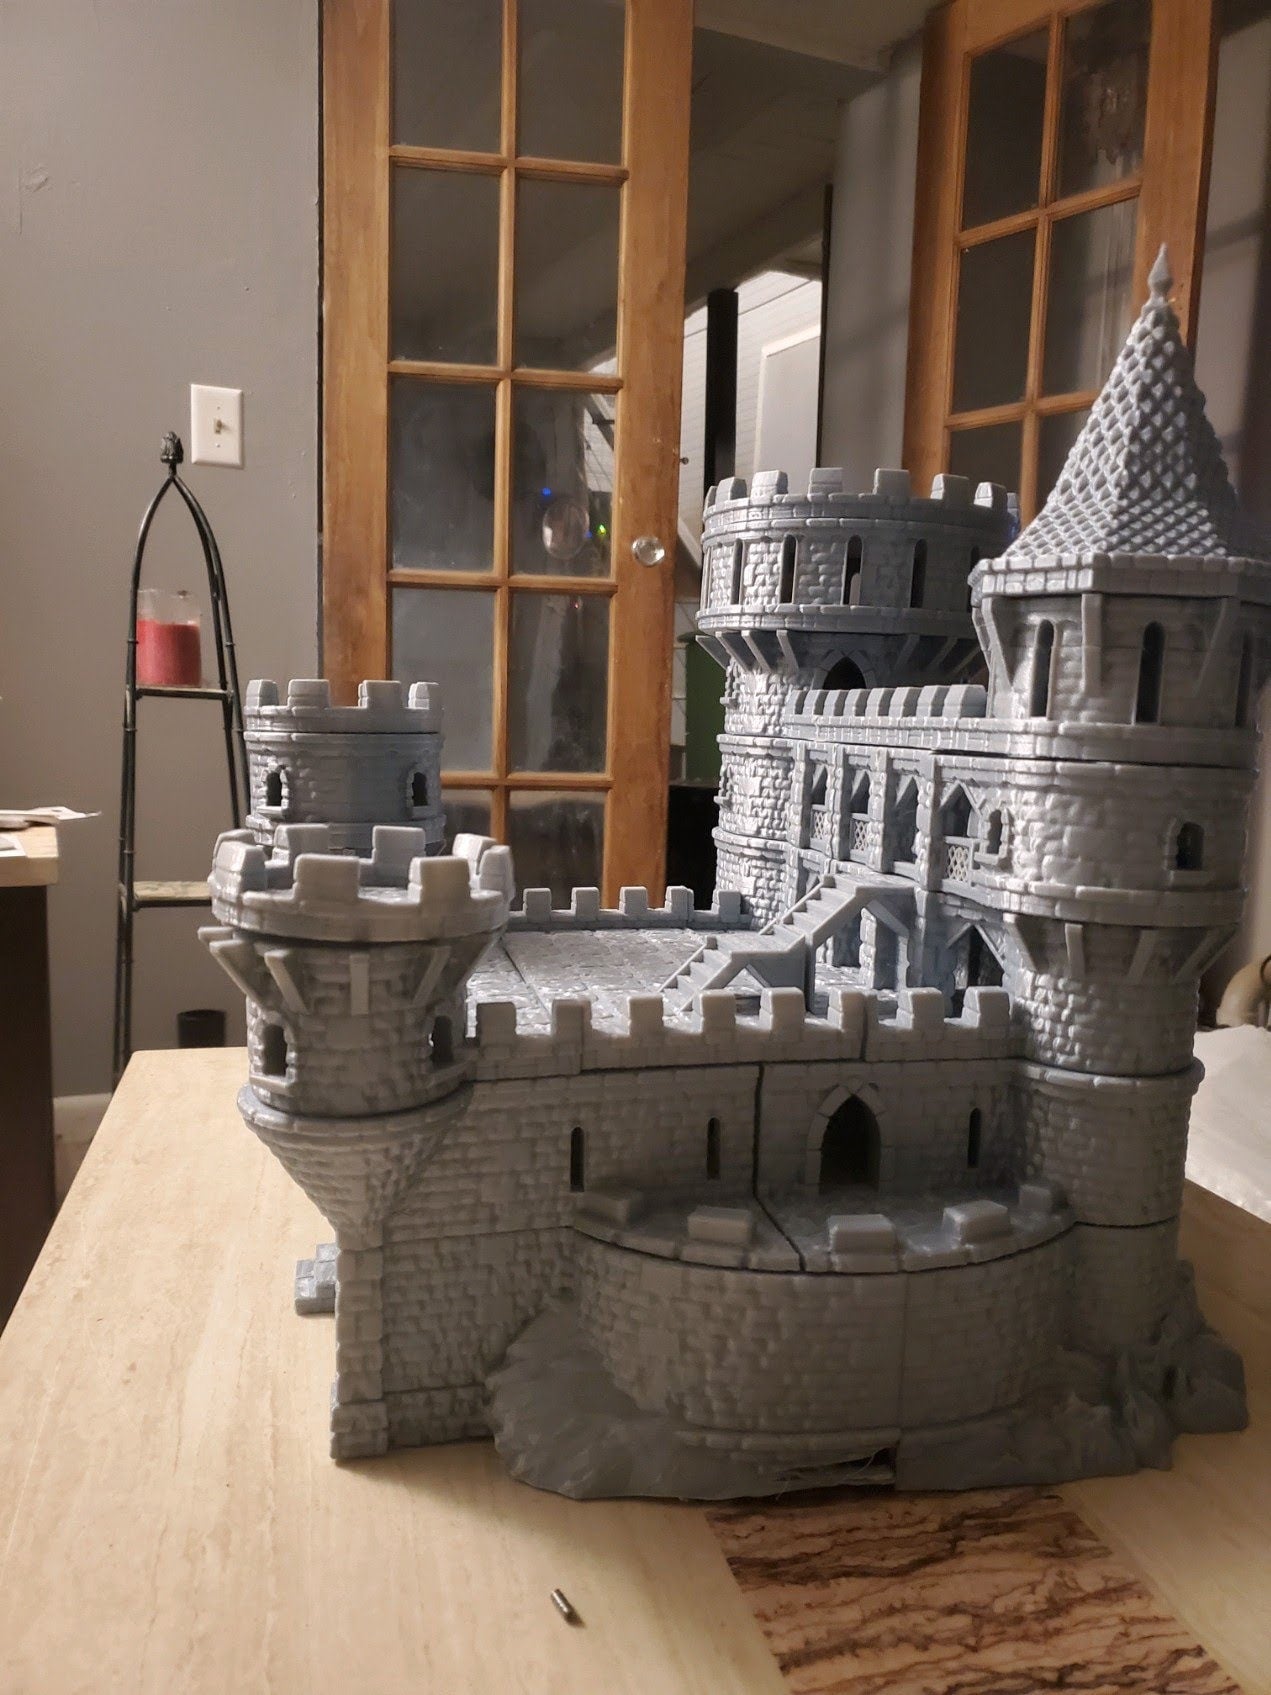 Dark Castle, castle, Fortress, Keep, Castle Keep, Ravenloft, Ravenloft Castle, DnD Castle, Stonewall Castle, Warhammer Terrain, Dungeons and Dragons, Warhammer, Terrain, Gaming Fortress, DND Fort, Fantasy Castle, Defensive Castle, Dark Palace